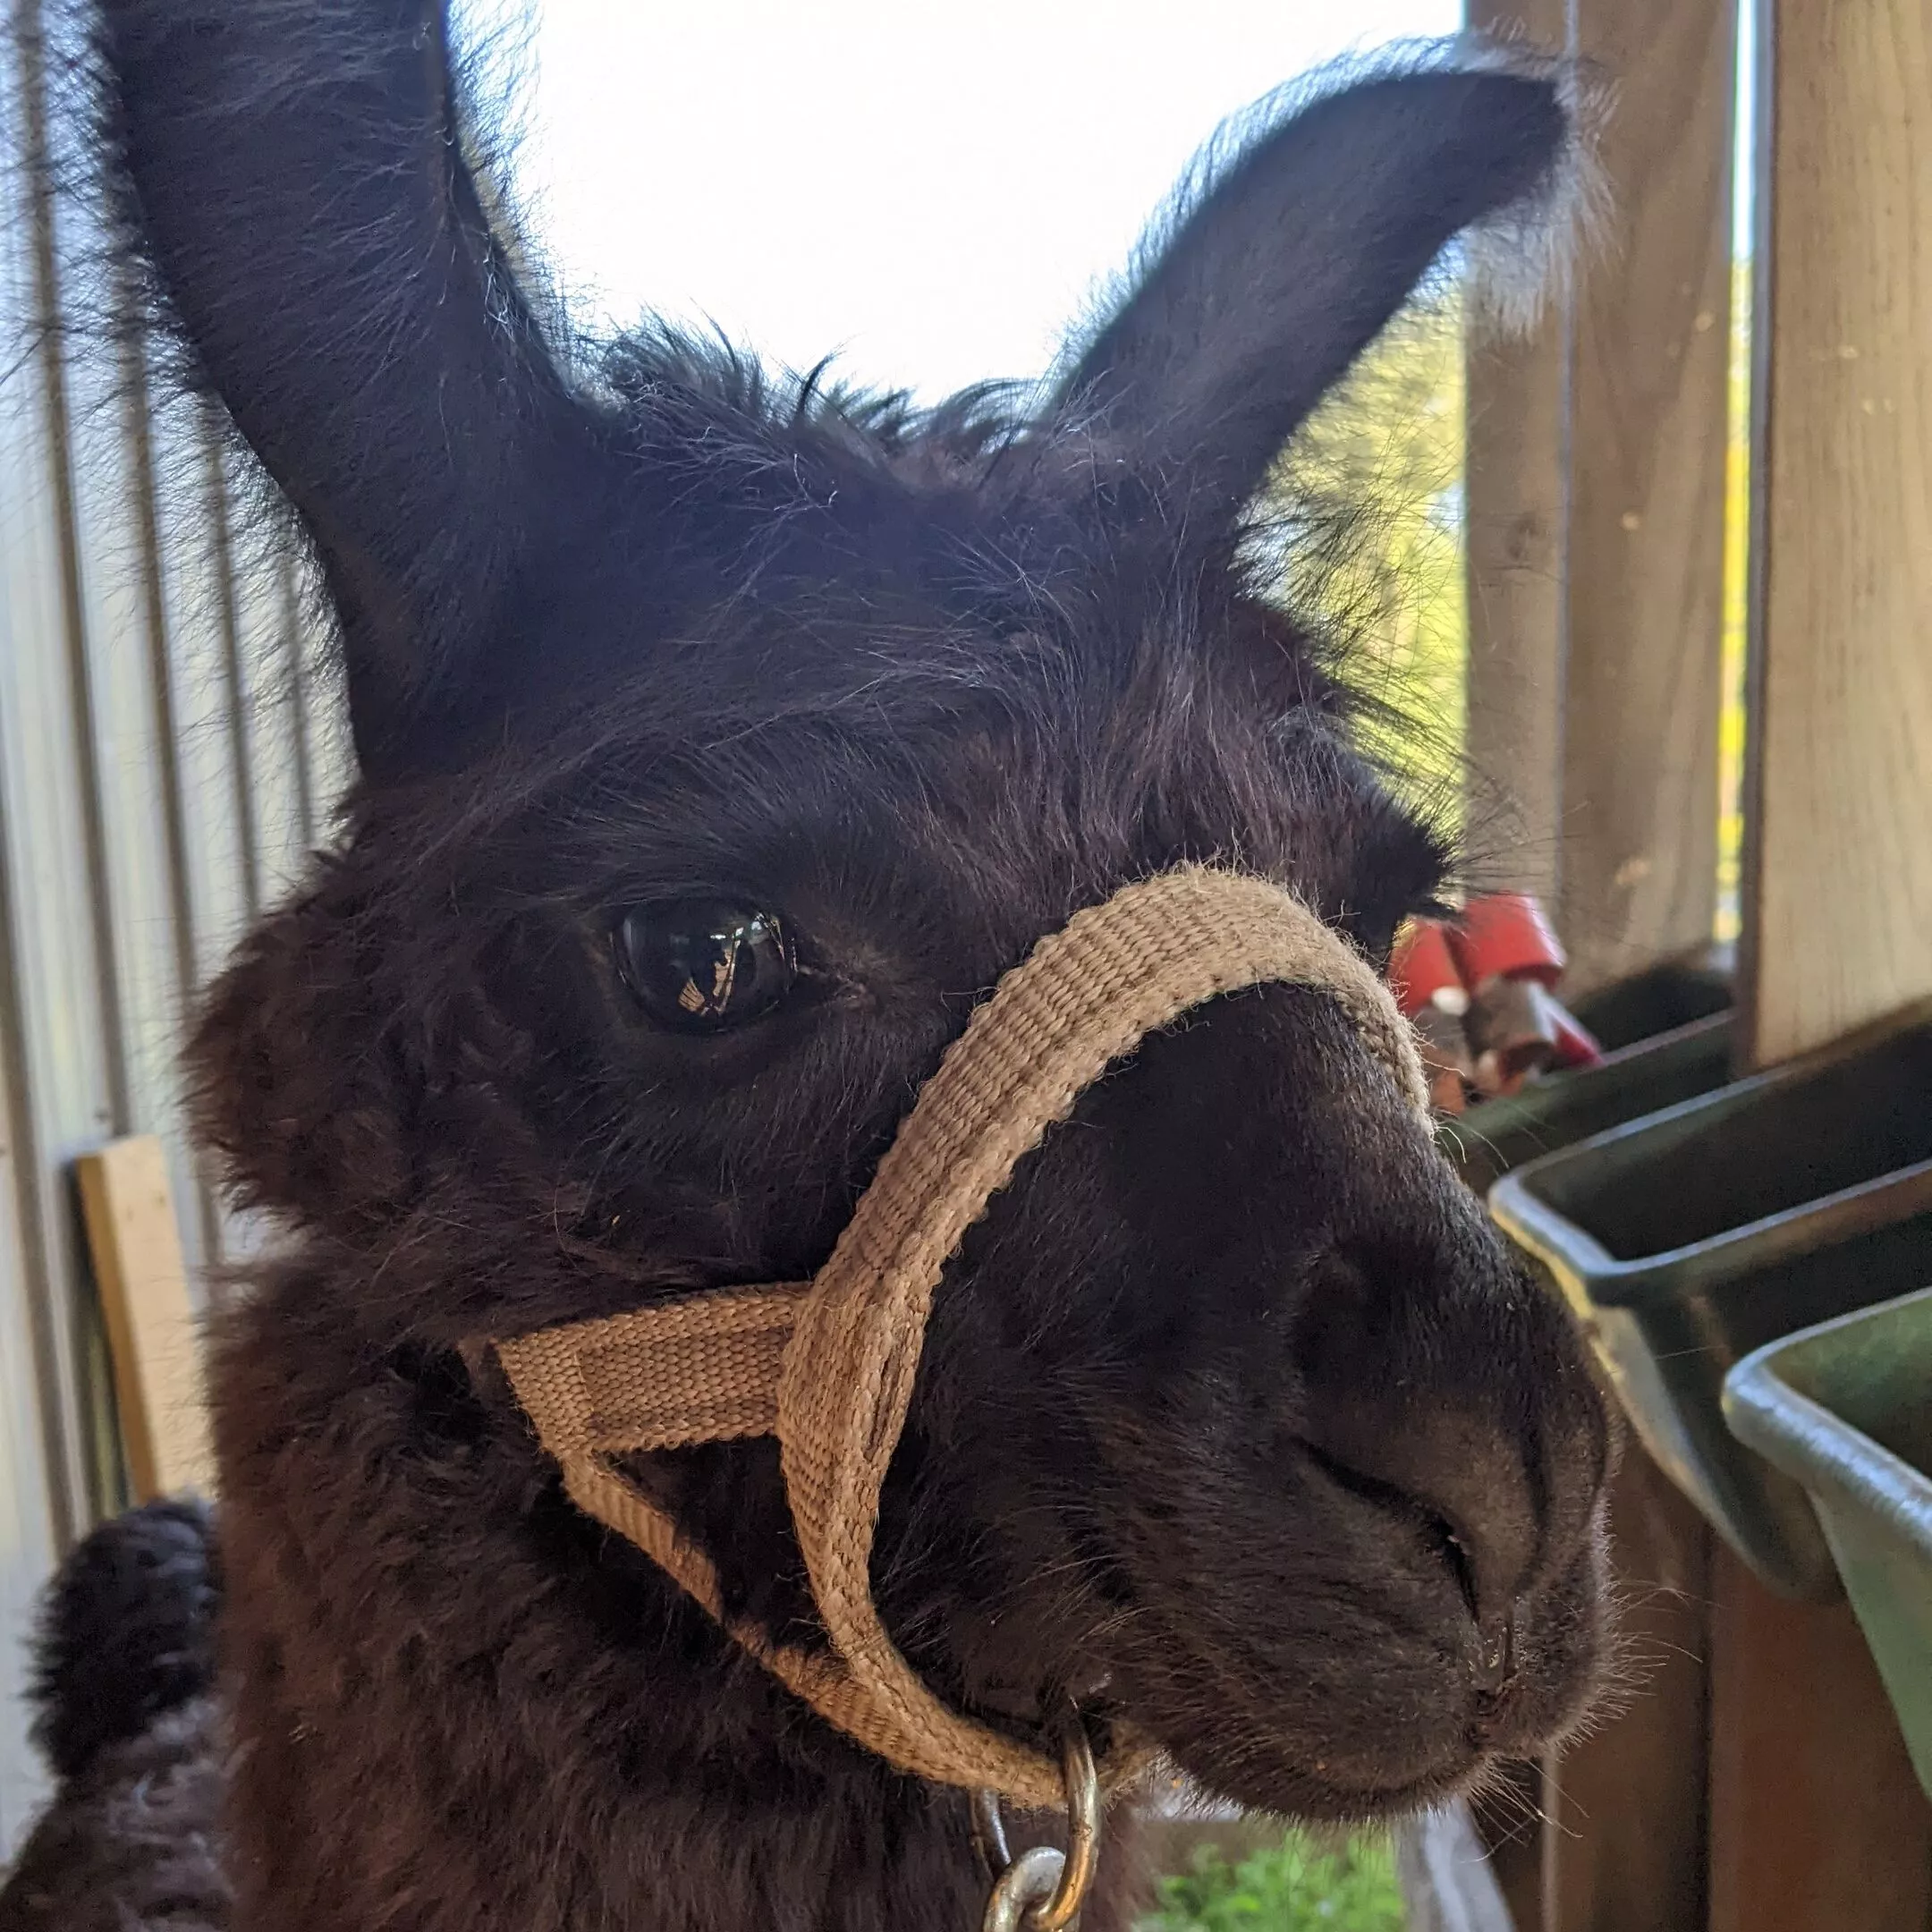 An image of a llama named Tonks wearing a halter for the first time